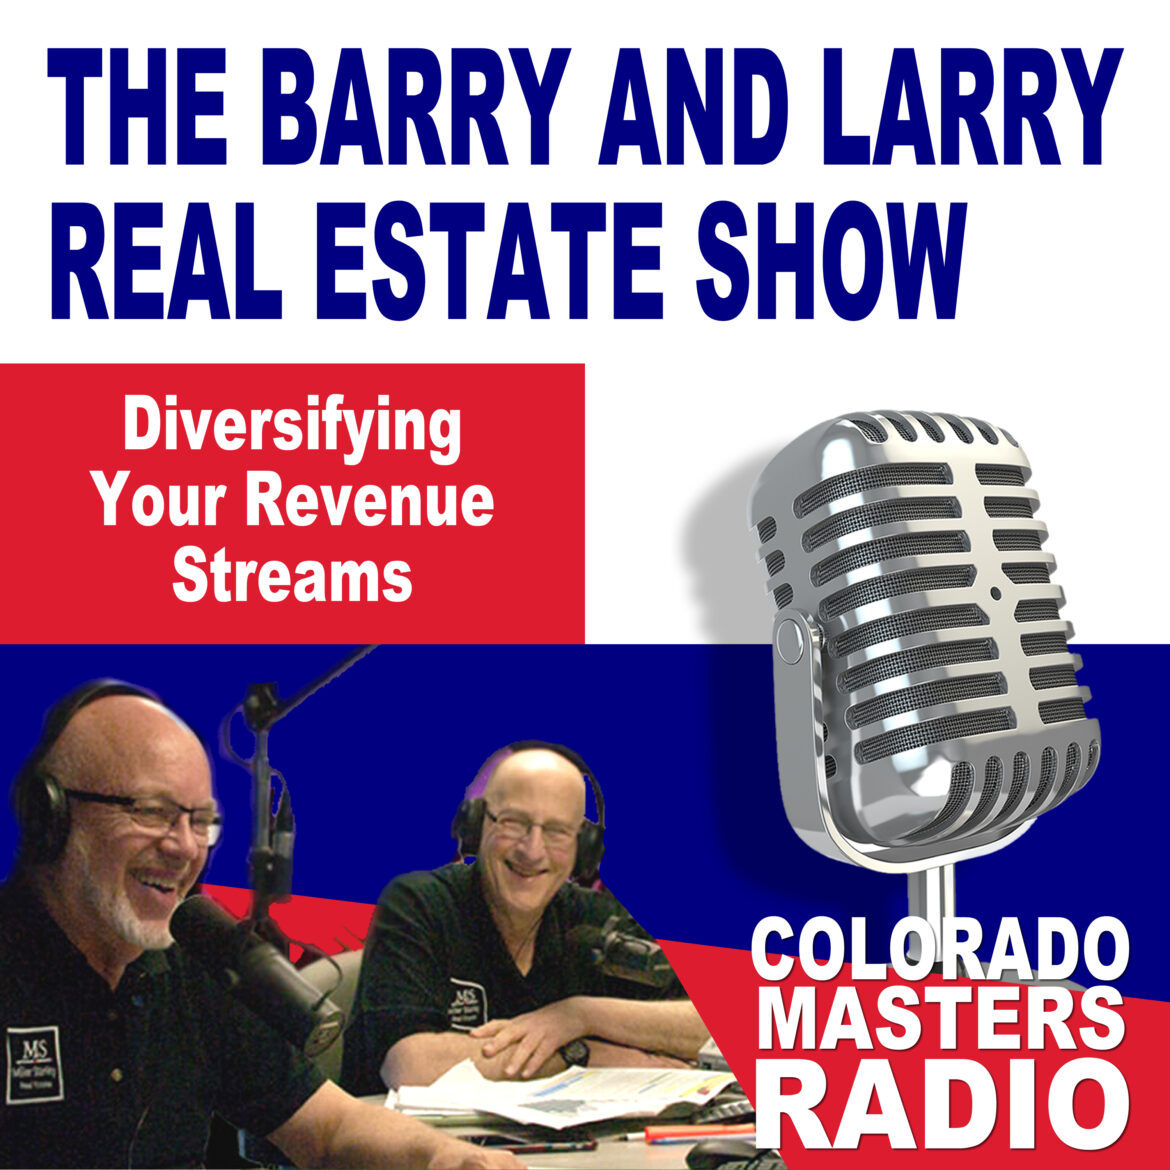 The Larry and Barry Real Estate Show - Diversifying Your Revenue Streams